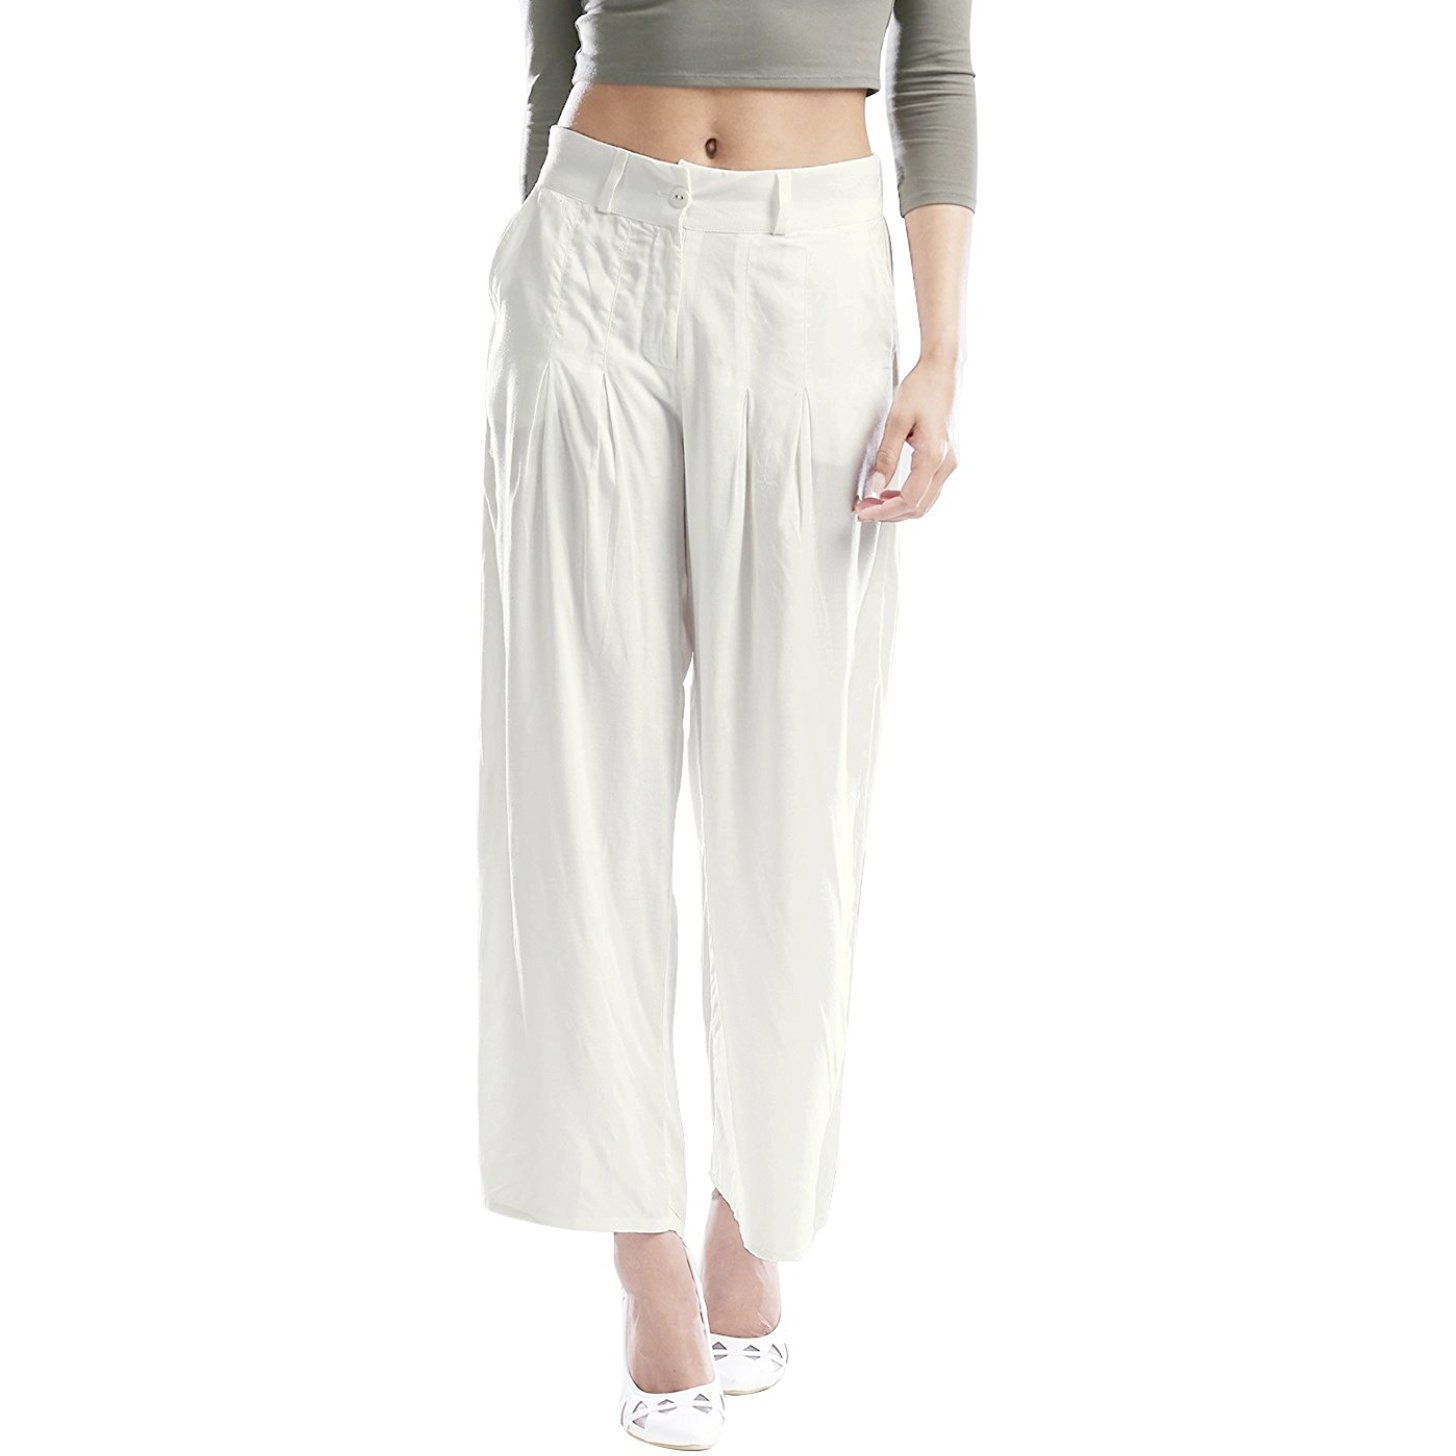 Women's High Waist Solid Color Casual Cotton Linen Loose Wide Leg Palazzo Pants